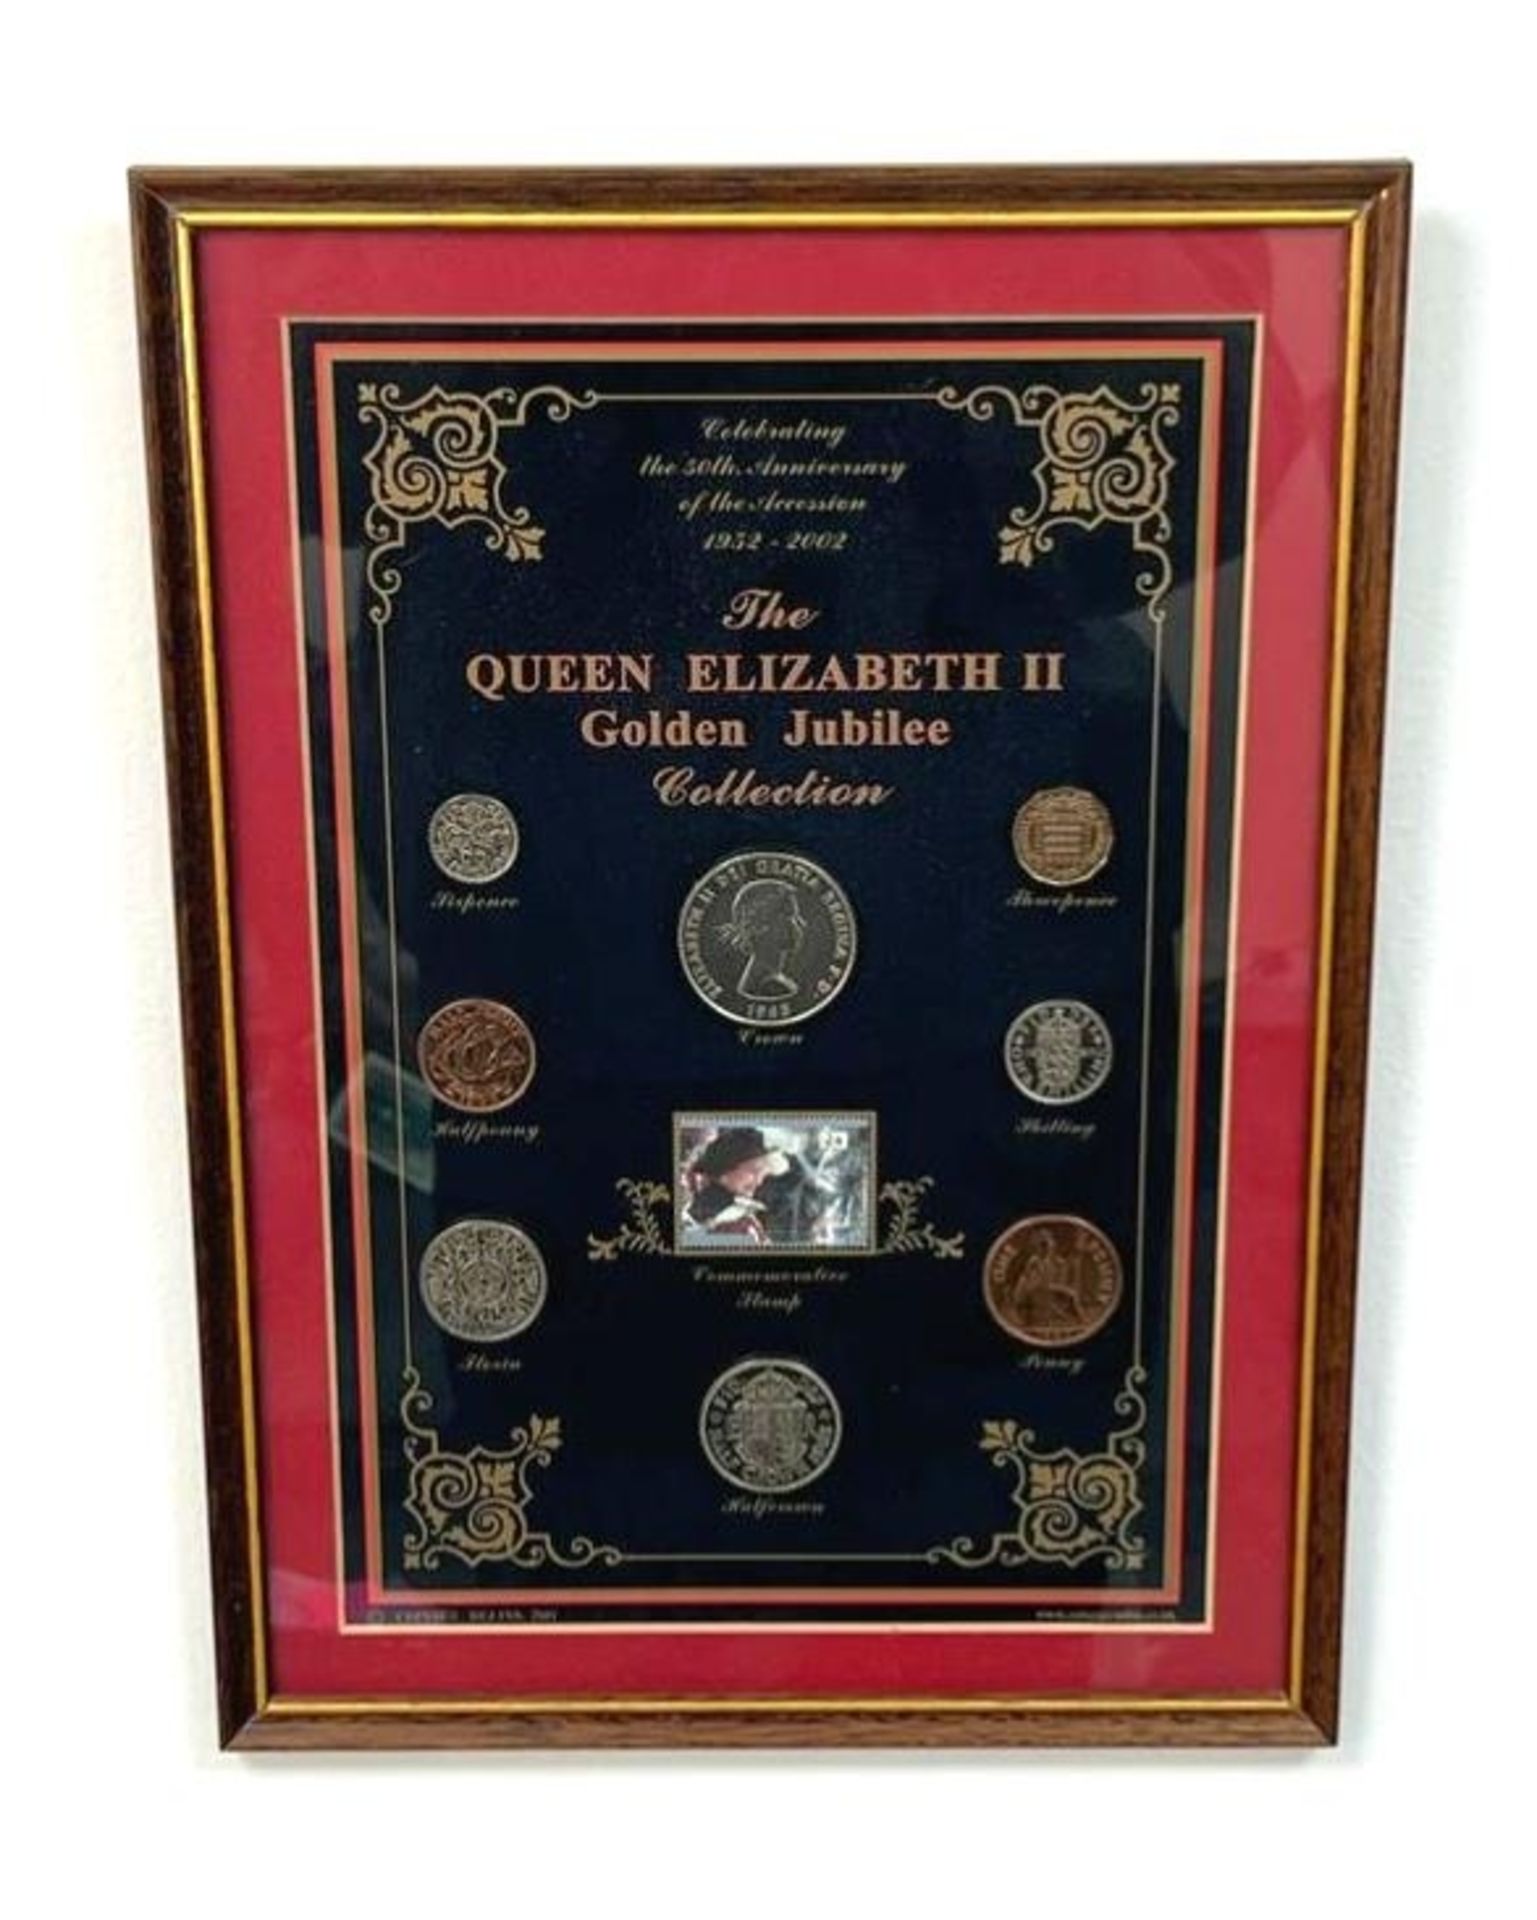 A Framed Queen Elizabeth II Golden Jubilee Coin Collection. Eight commemorative coins in total. In